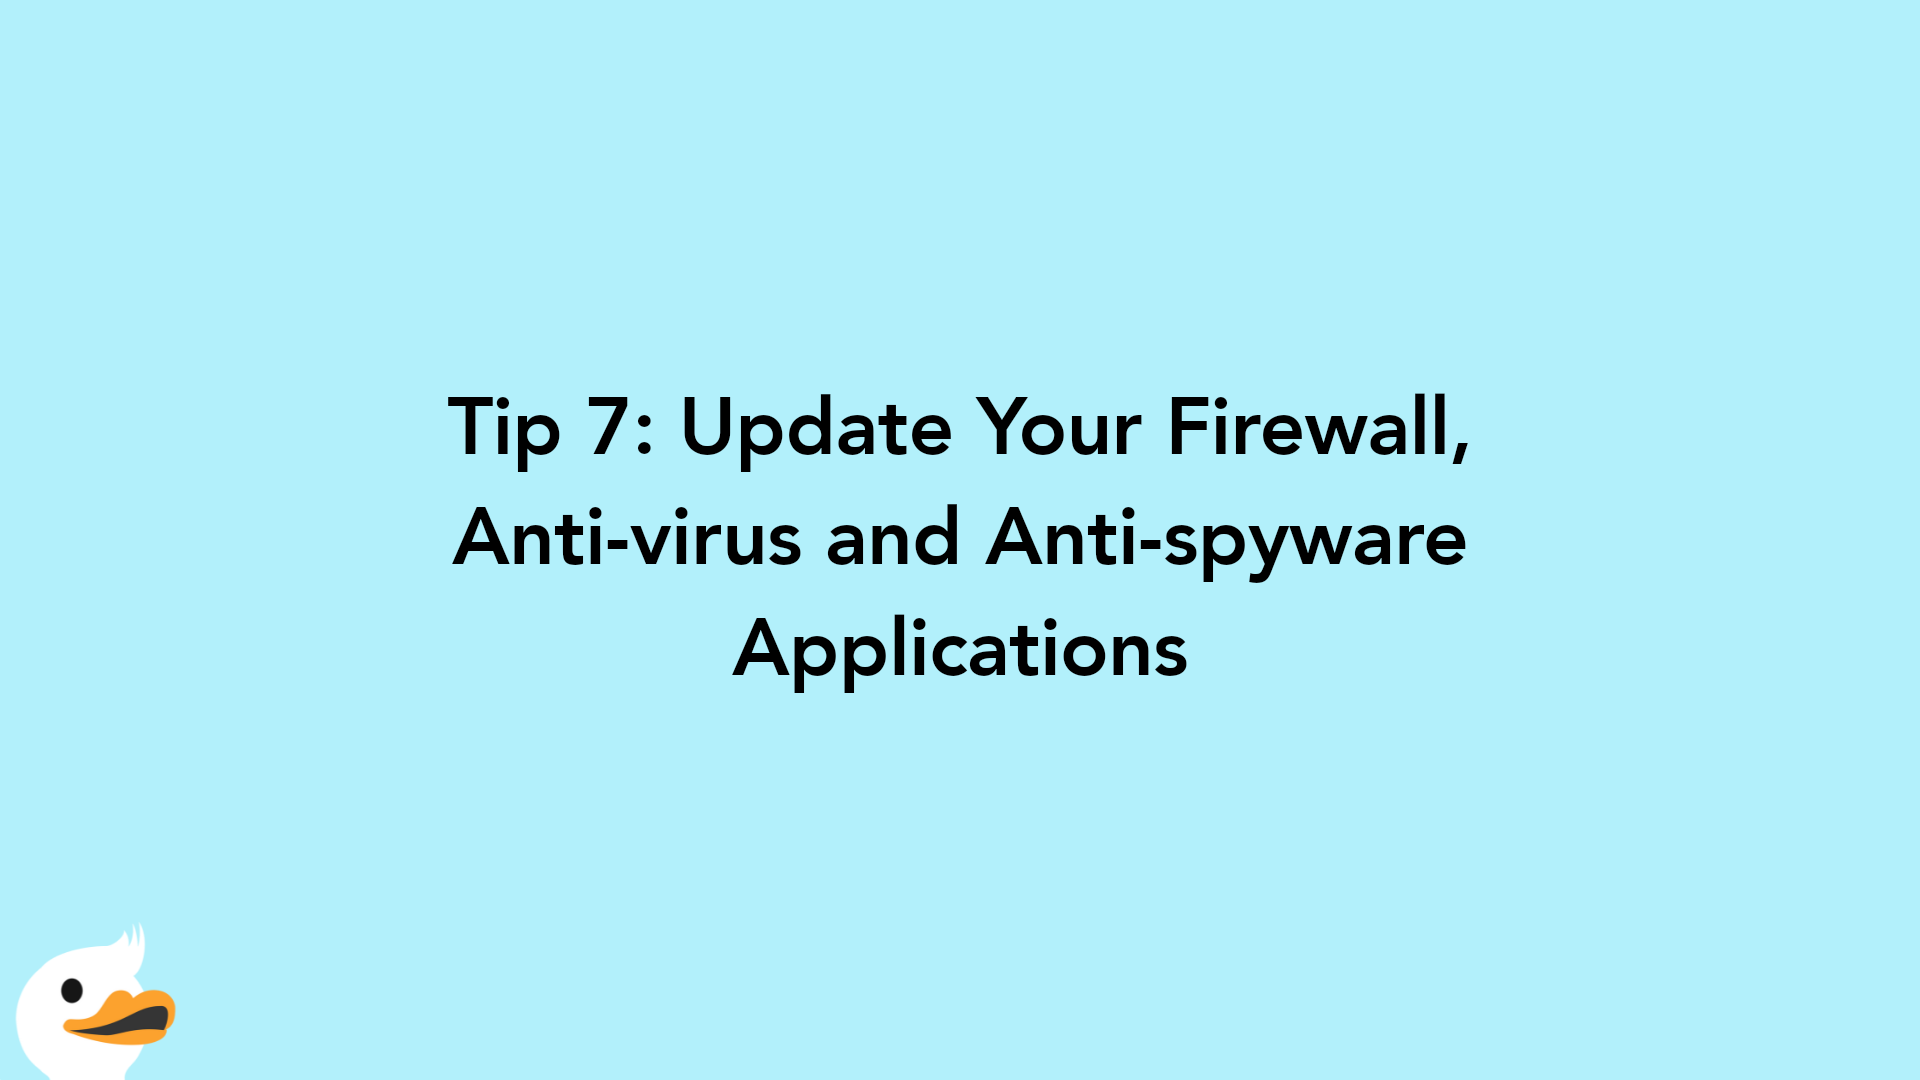 Tip 7: Update Your Firewall, Anti-virus and Anti-spyware Applications